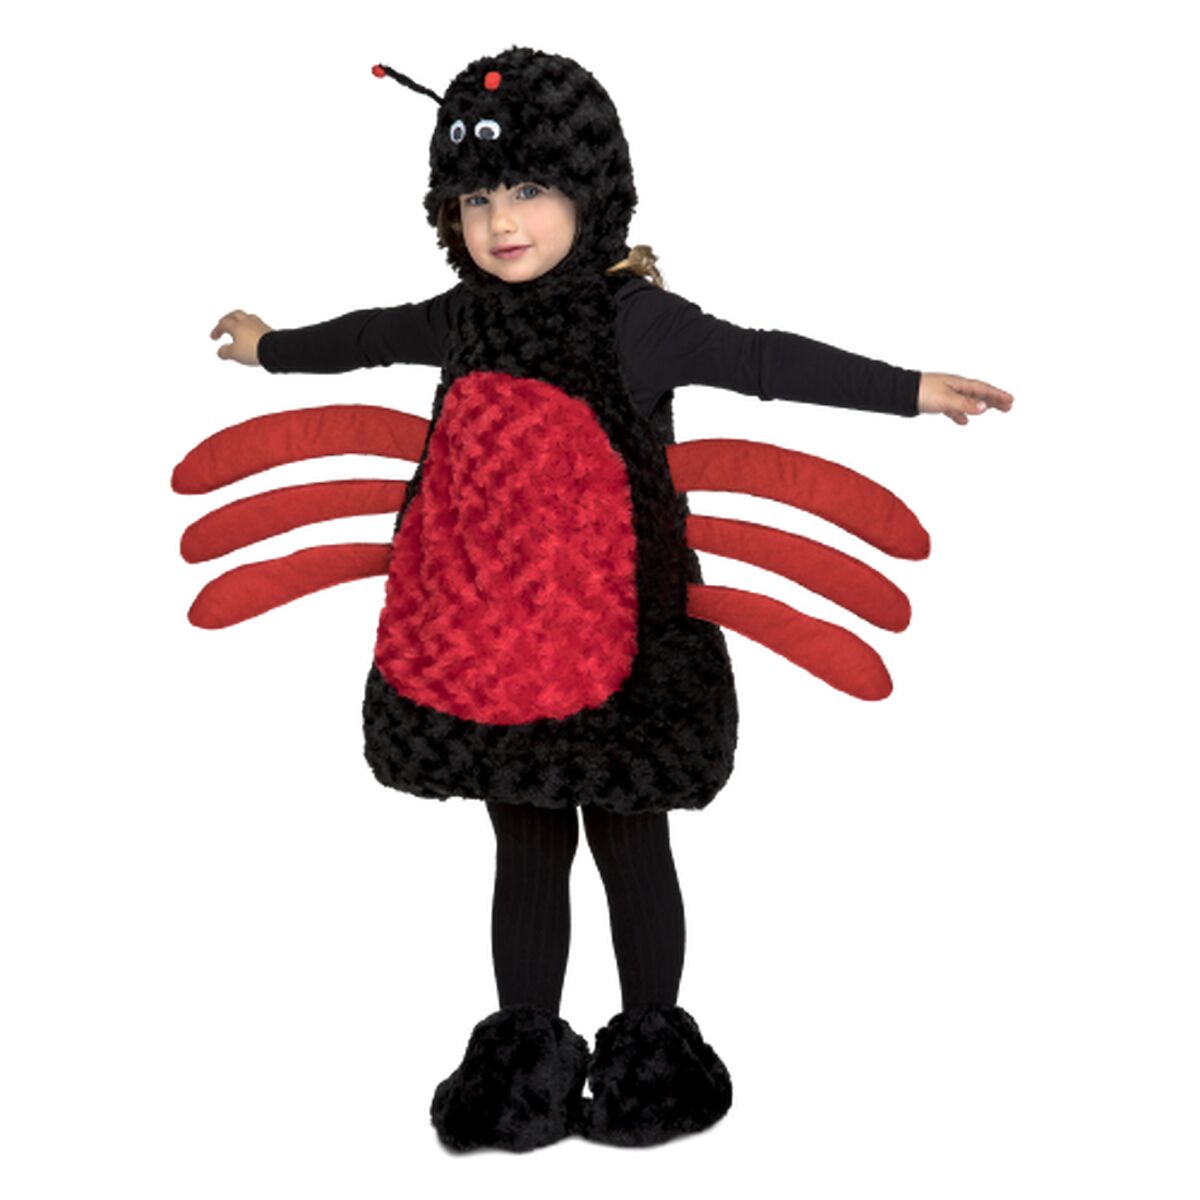 Costume for Children My Other Me Red Black Spider (3 Pieces)